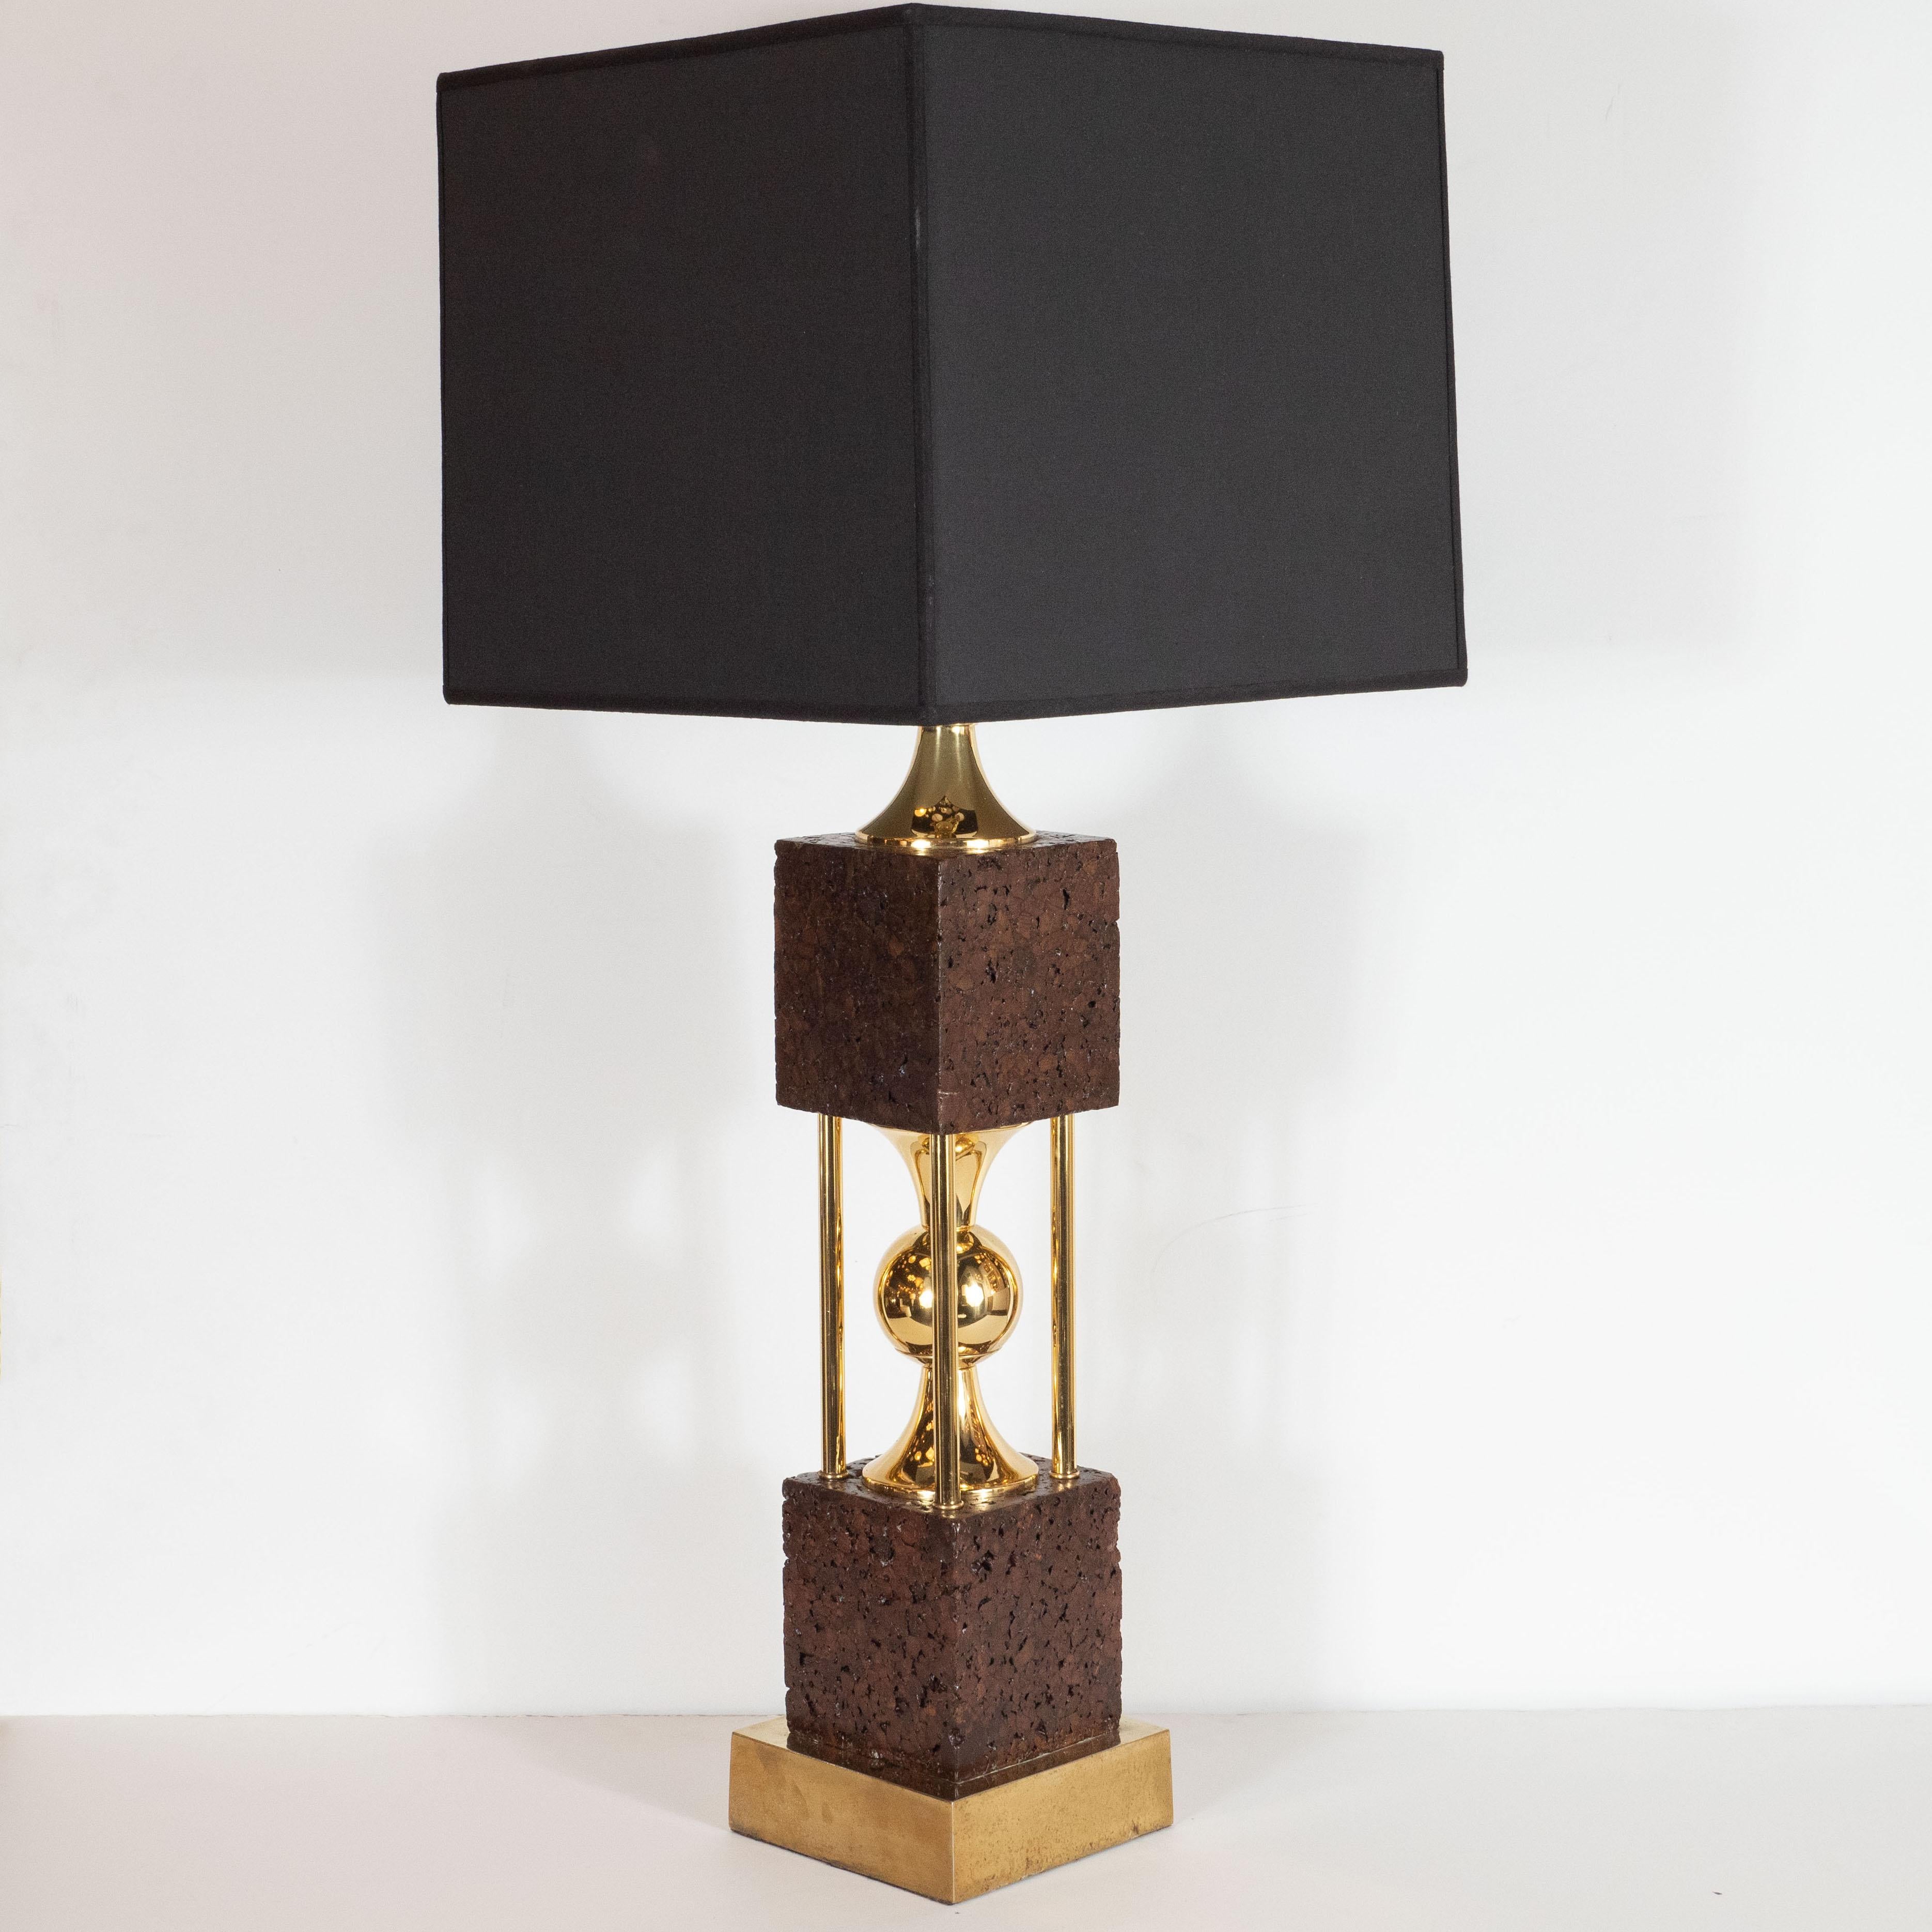 Pair of Sculptural Mid-Century Modern Polished Brass and Cork Table Lamps For Sale 3